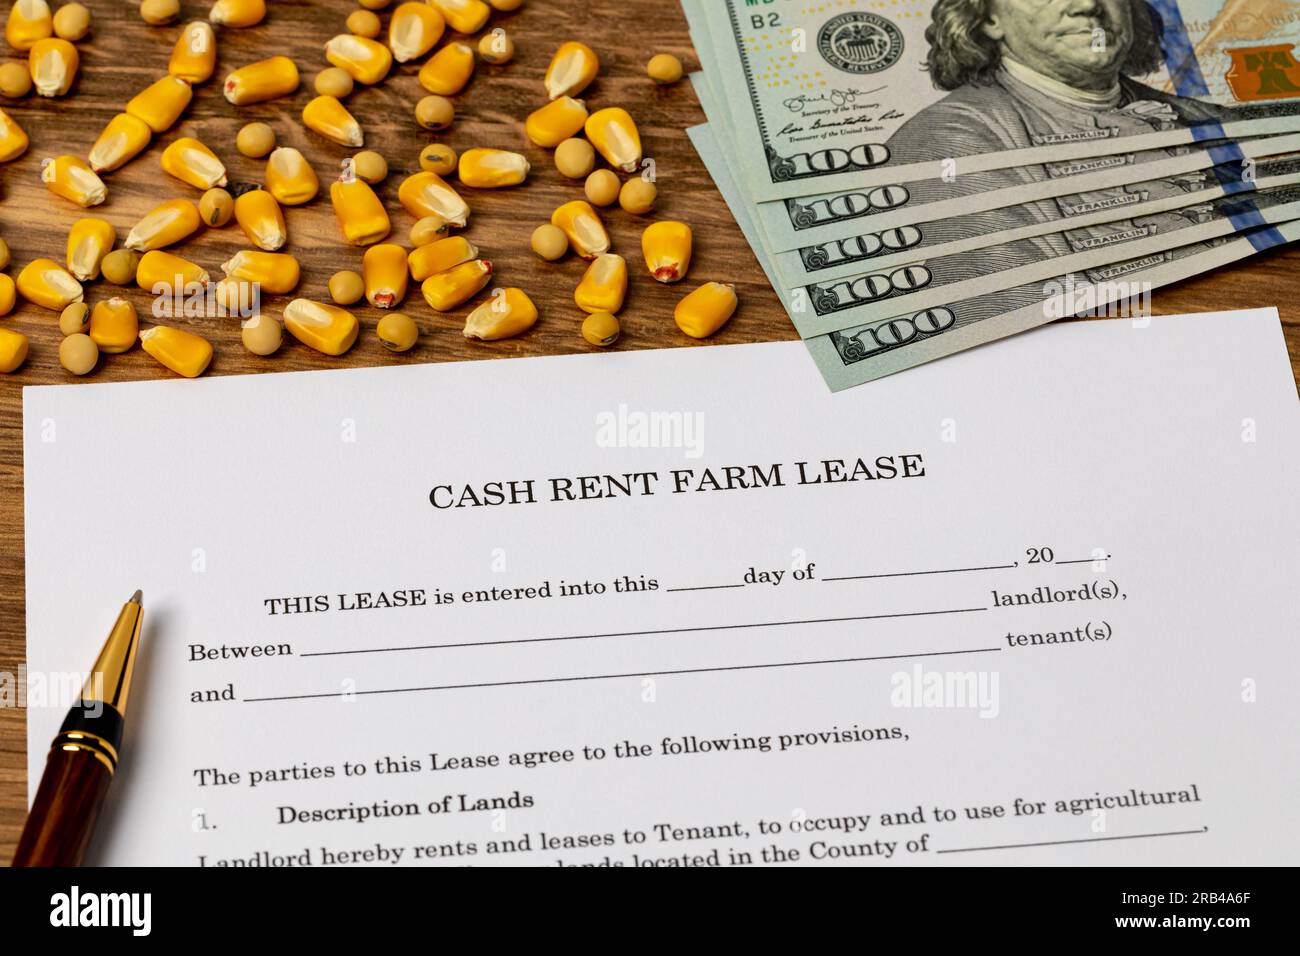 Cash rent farm lease document with corn and soybean seed. Farming, agriculture and tenant farming concept. Stock Photo